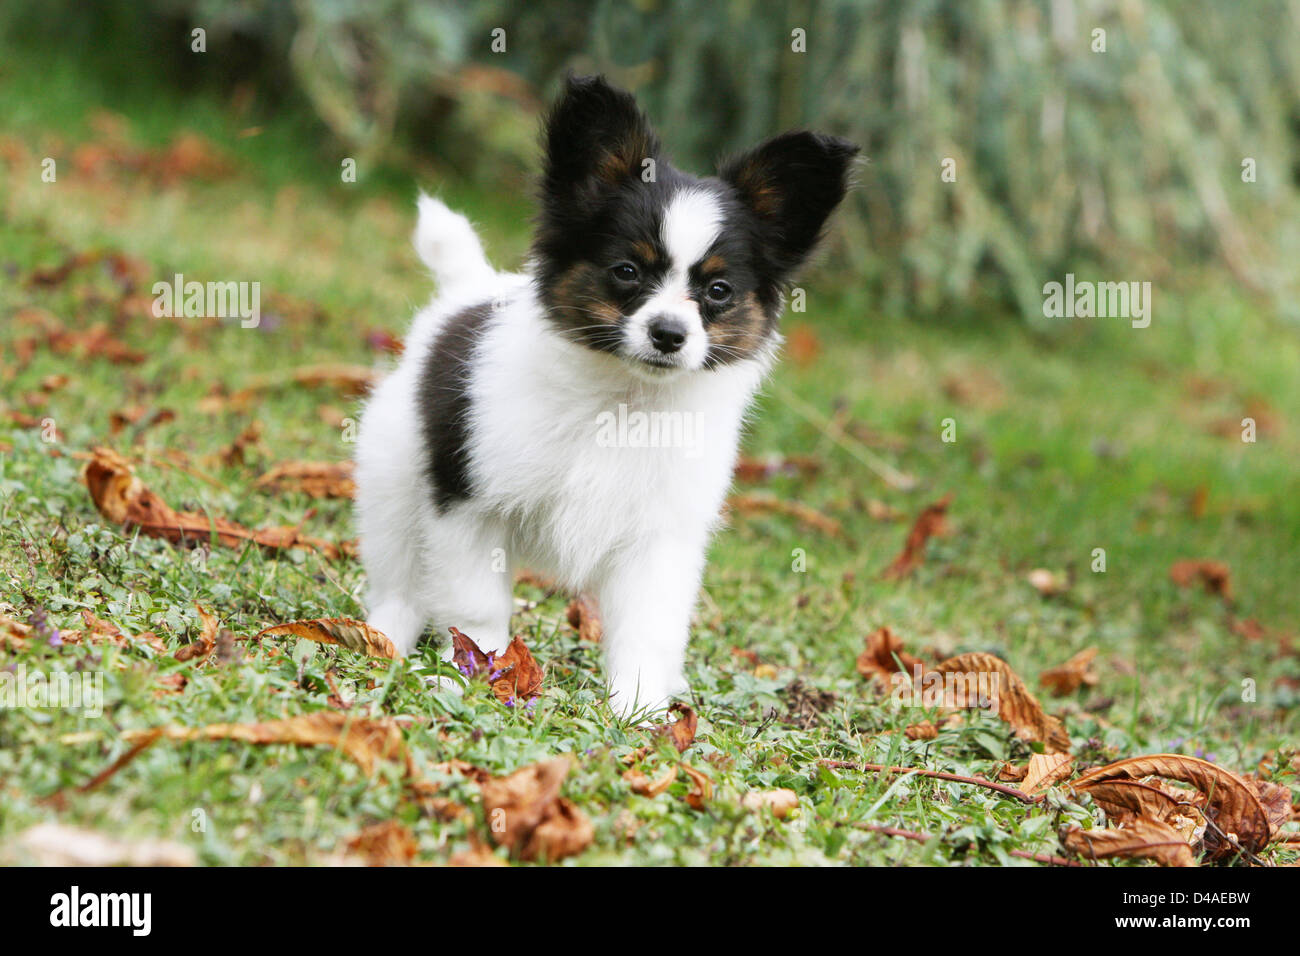 Dog Papillon / Continental Toy Spaniel Butterfly Dog  puppy standing in a park Stock Photo